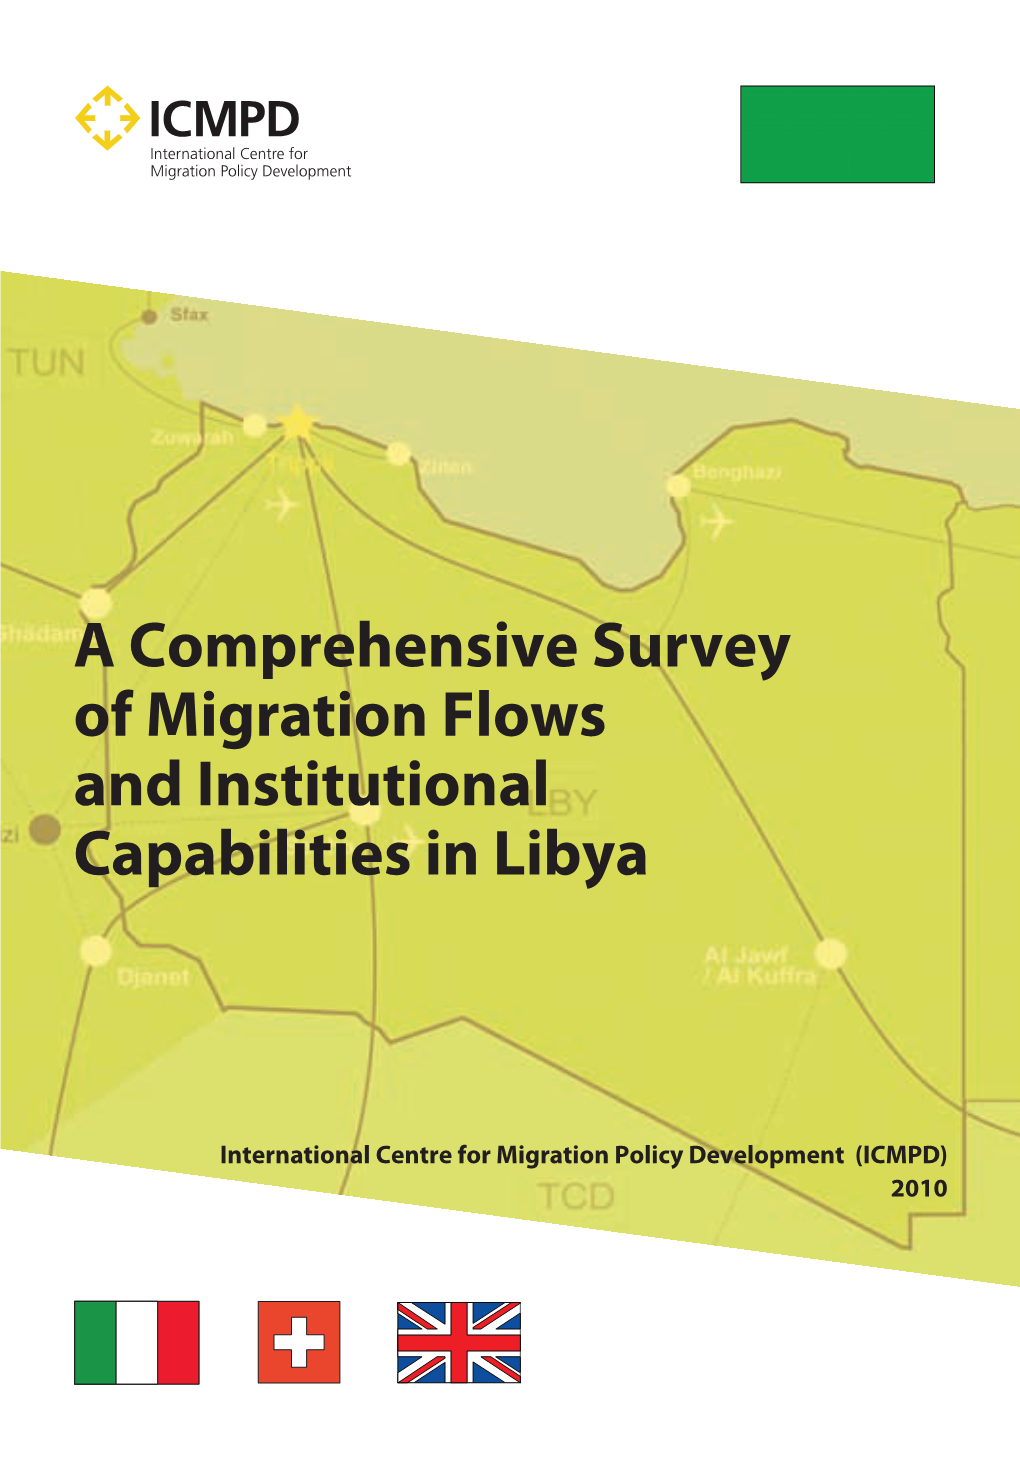 A Comprehensive Survey of Migration Flows and Institutional Capabilities